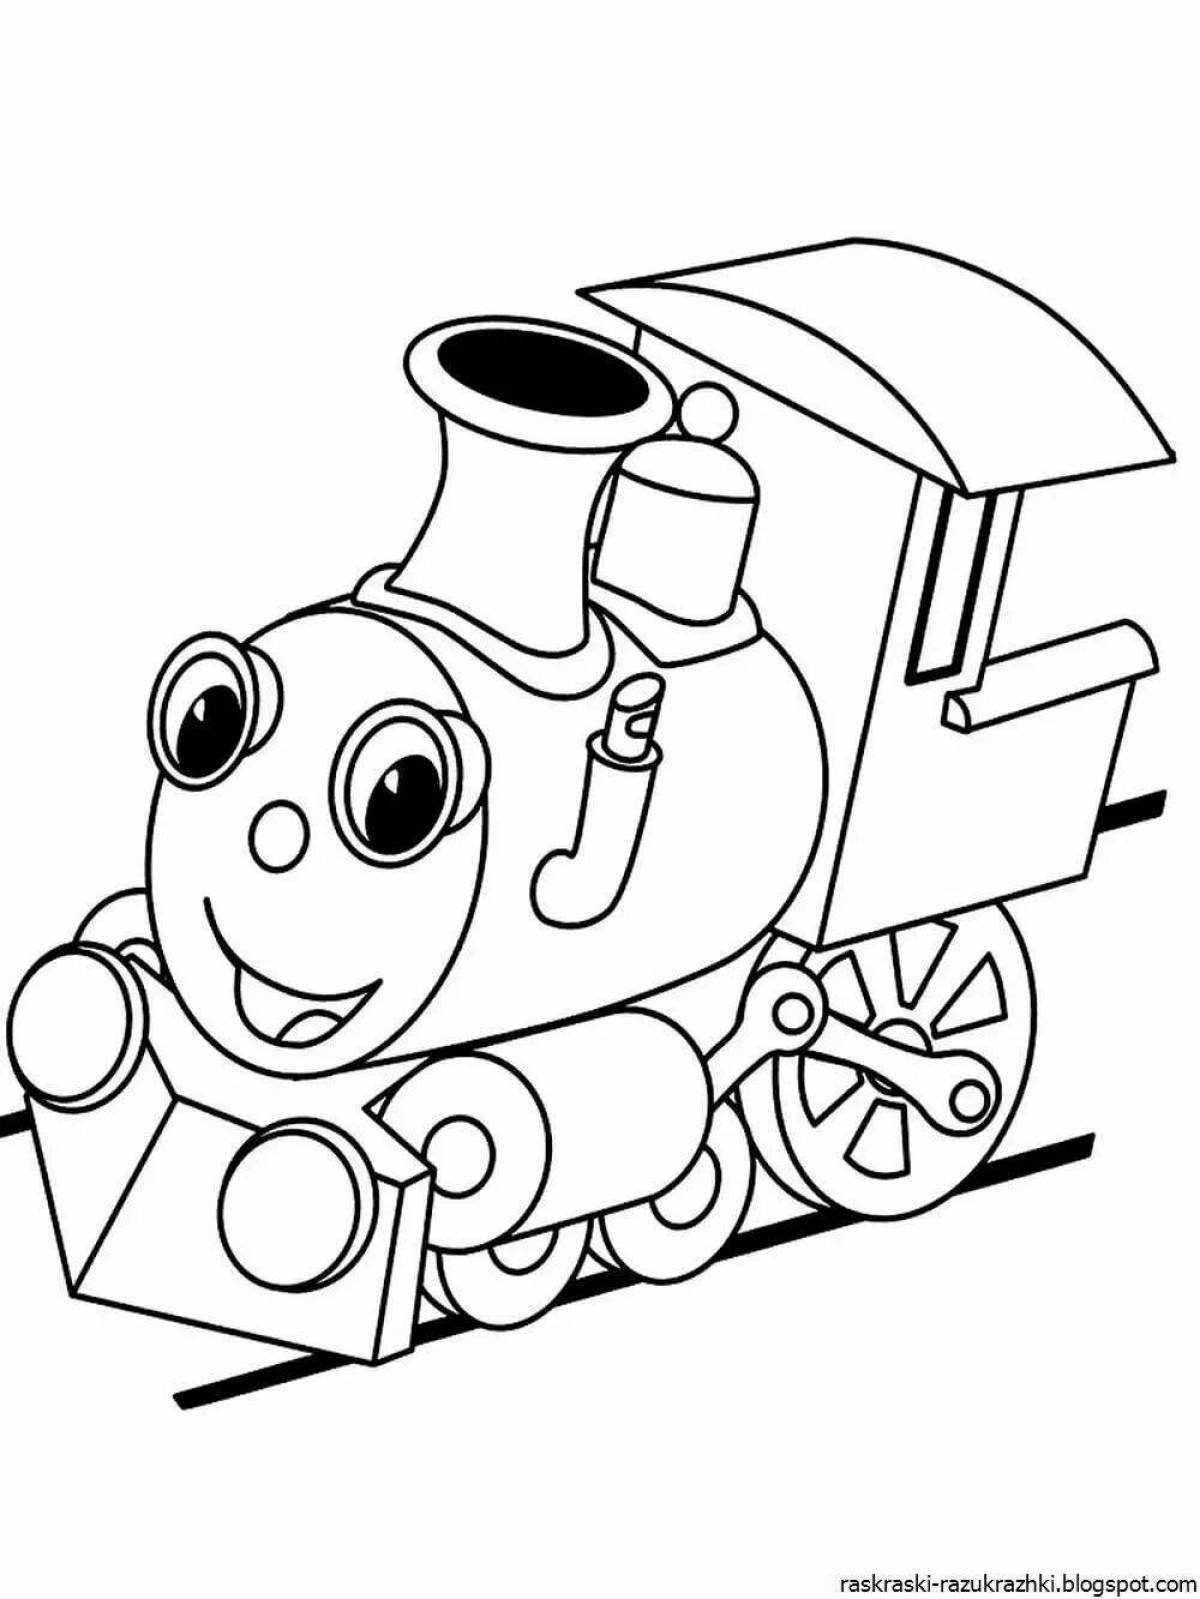 Colored playful children's train coloring book